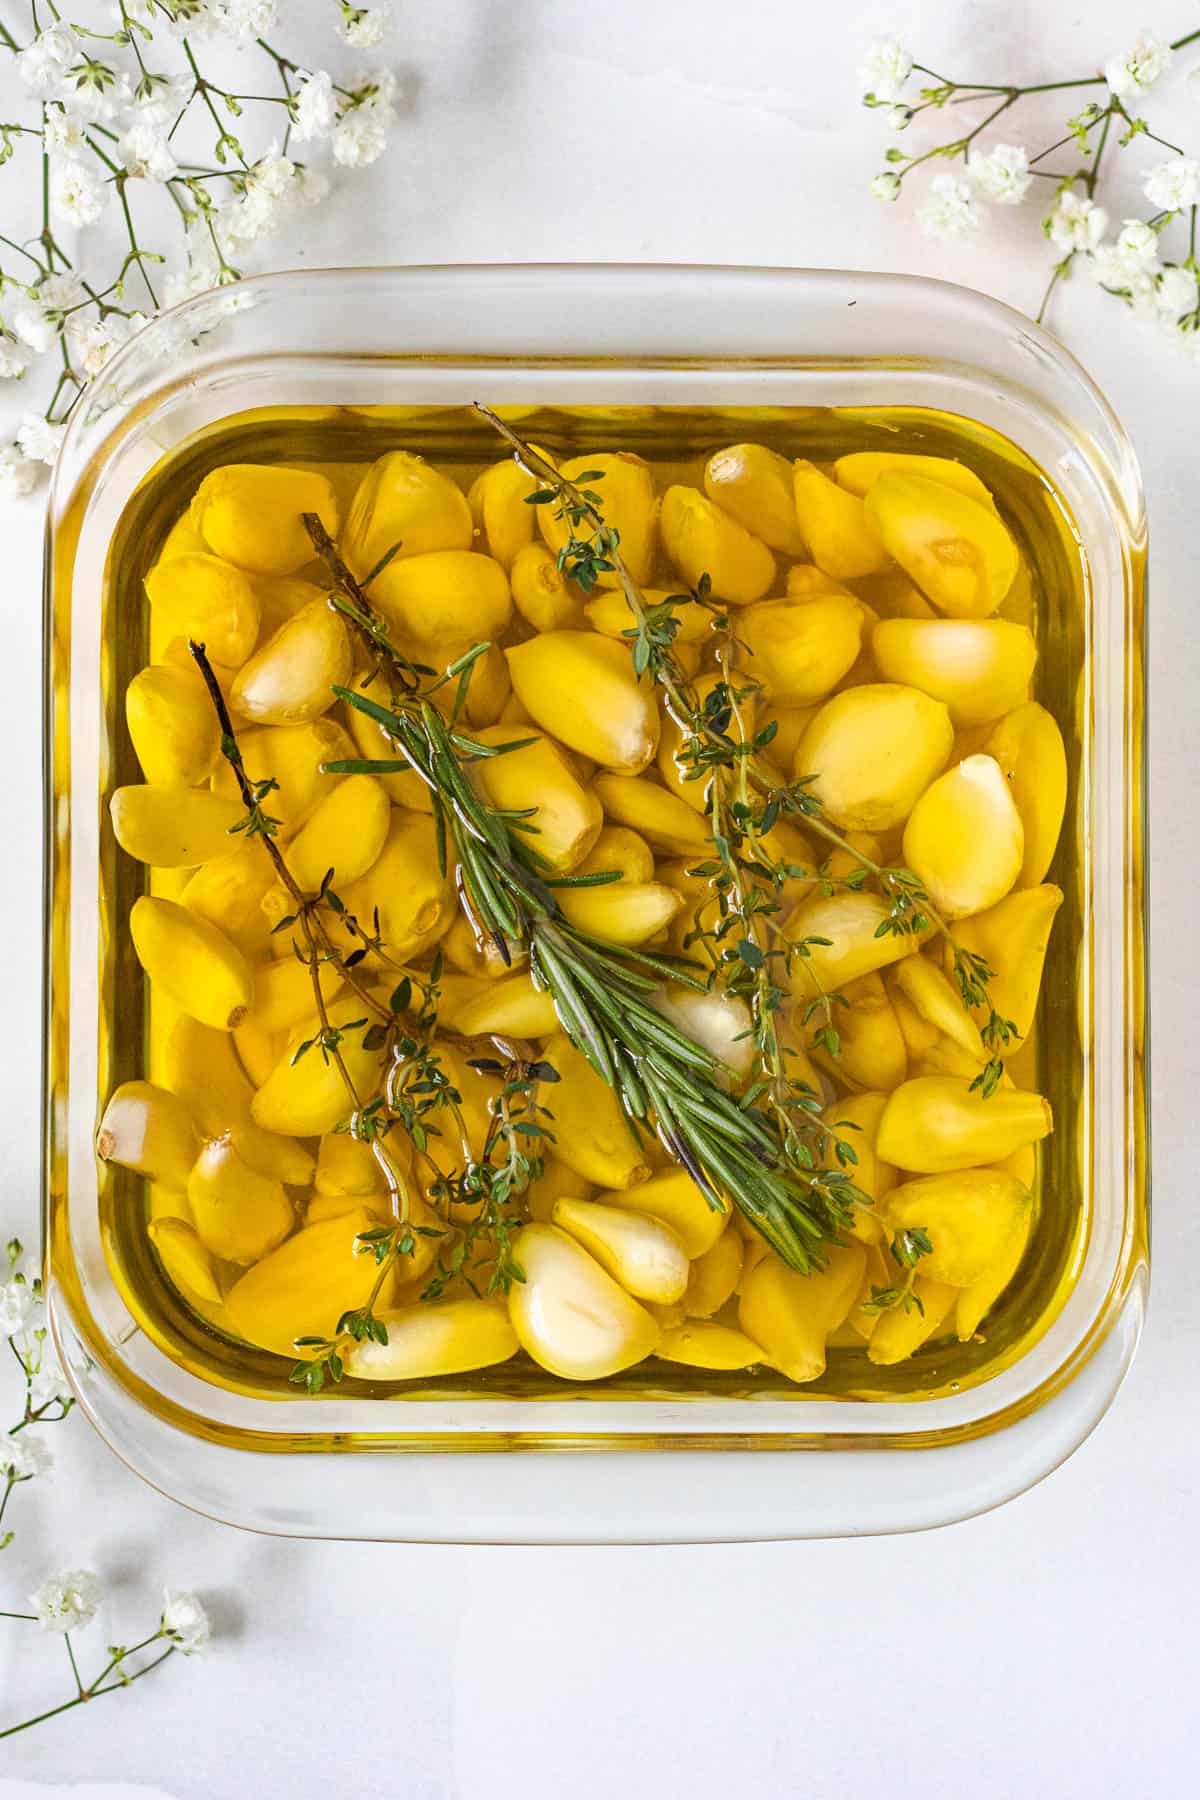 garlic cloves with olive oil, rosemary, and thyme in an oven safe pan with a light colored background